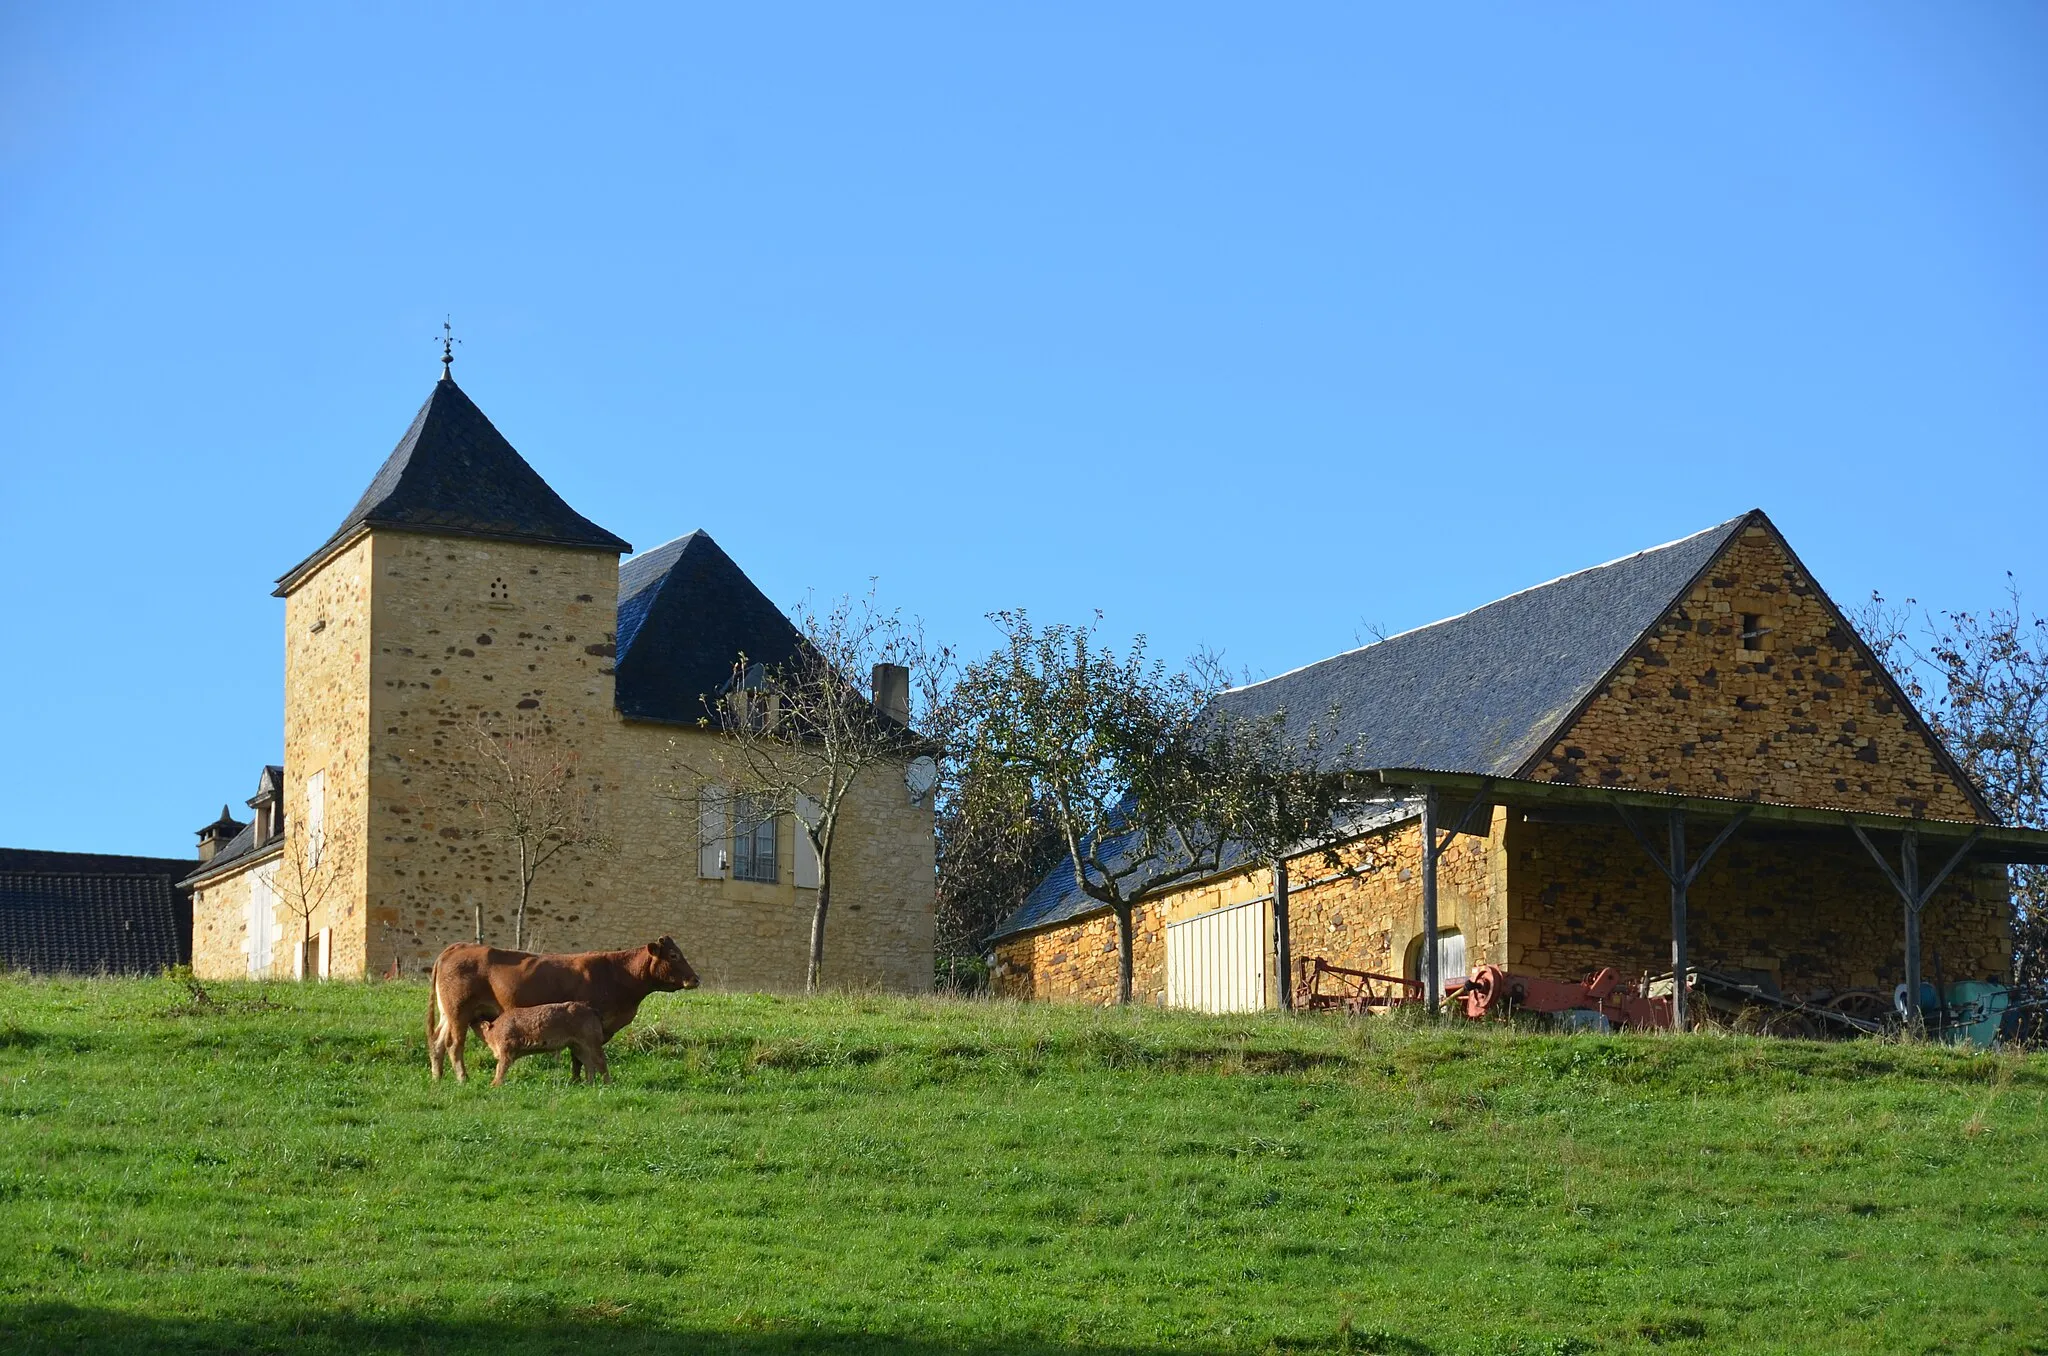 Photo showing: Even in Autumn there are young "Limousin-race" cows. Lovely with a pigeon-tower house in Dordogne district